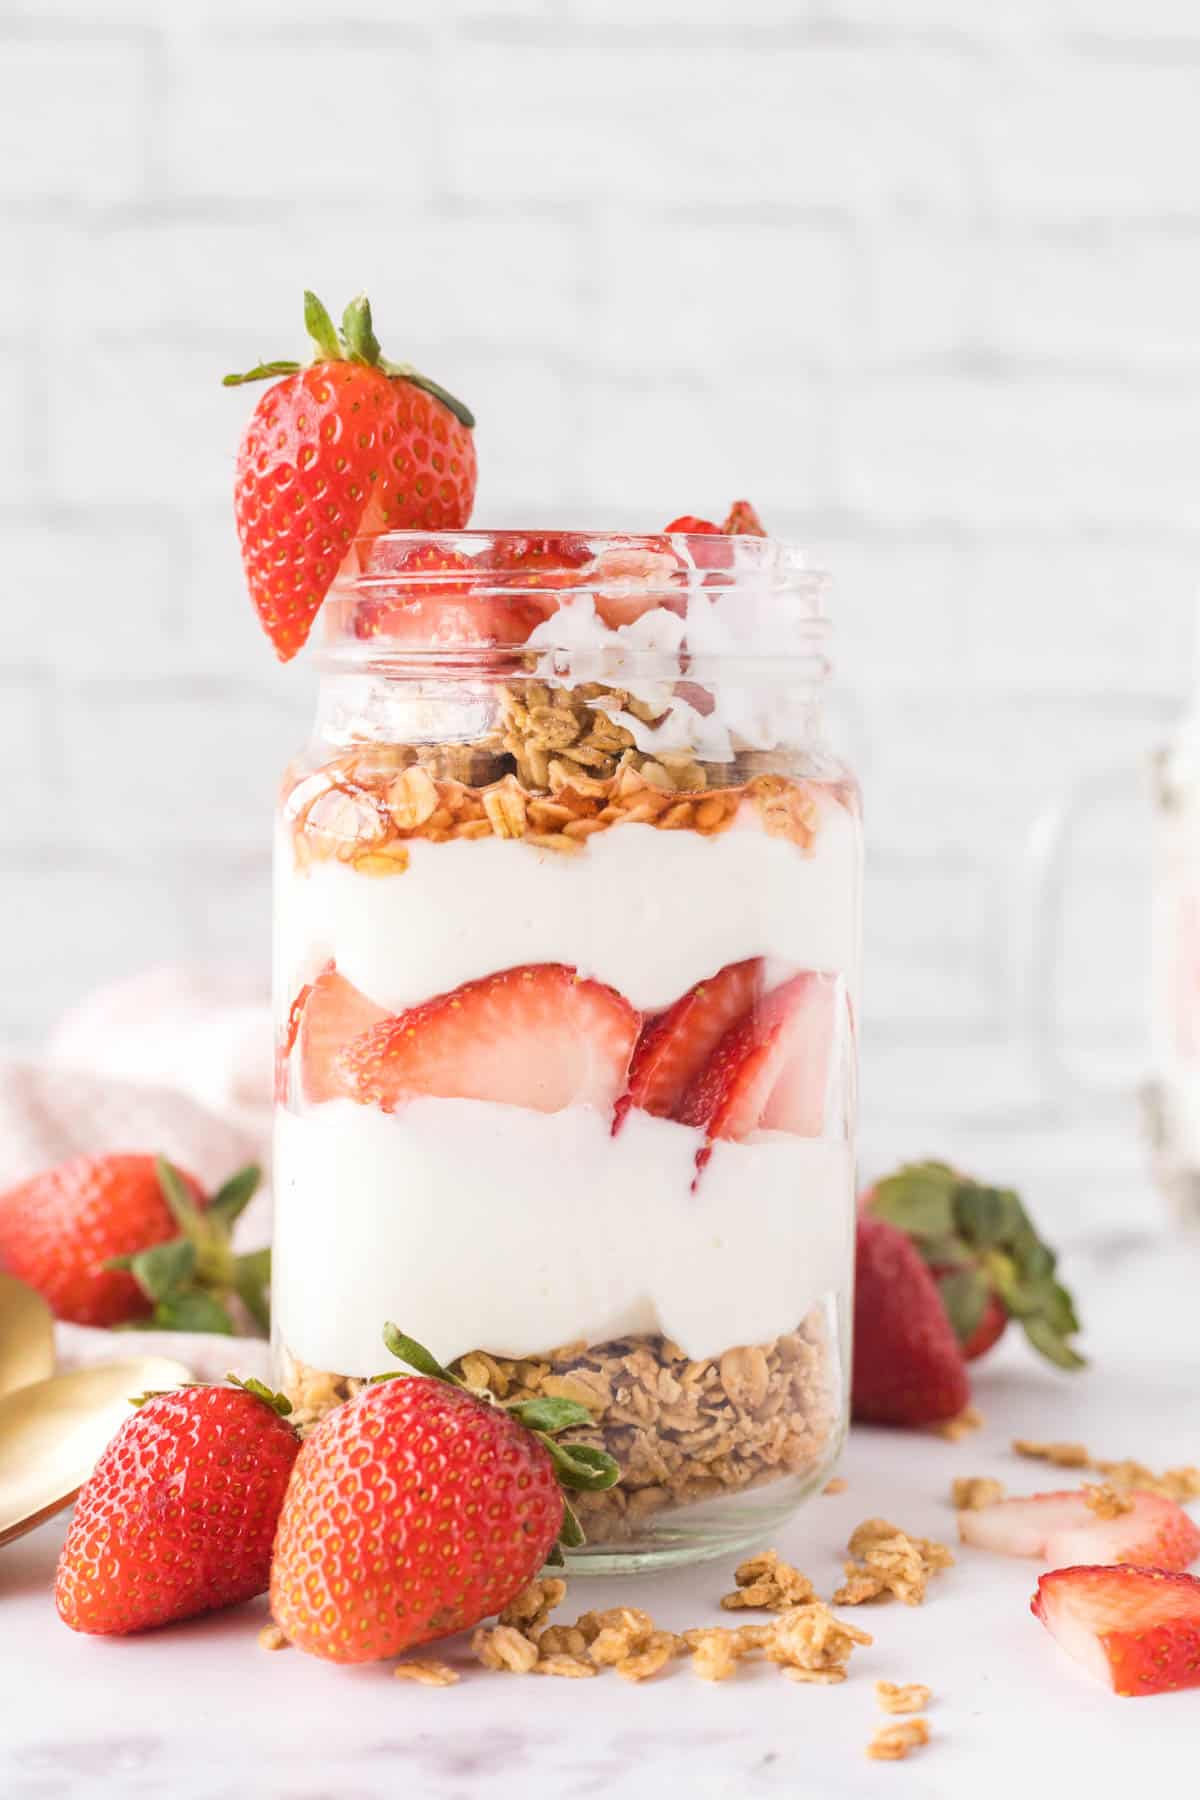 A strawberry granola parfait in a mason jar garnished with a whole strawberry on the rim.